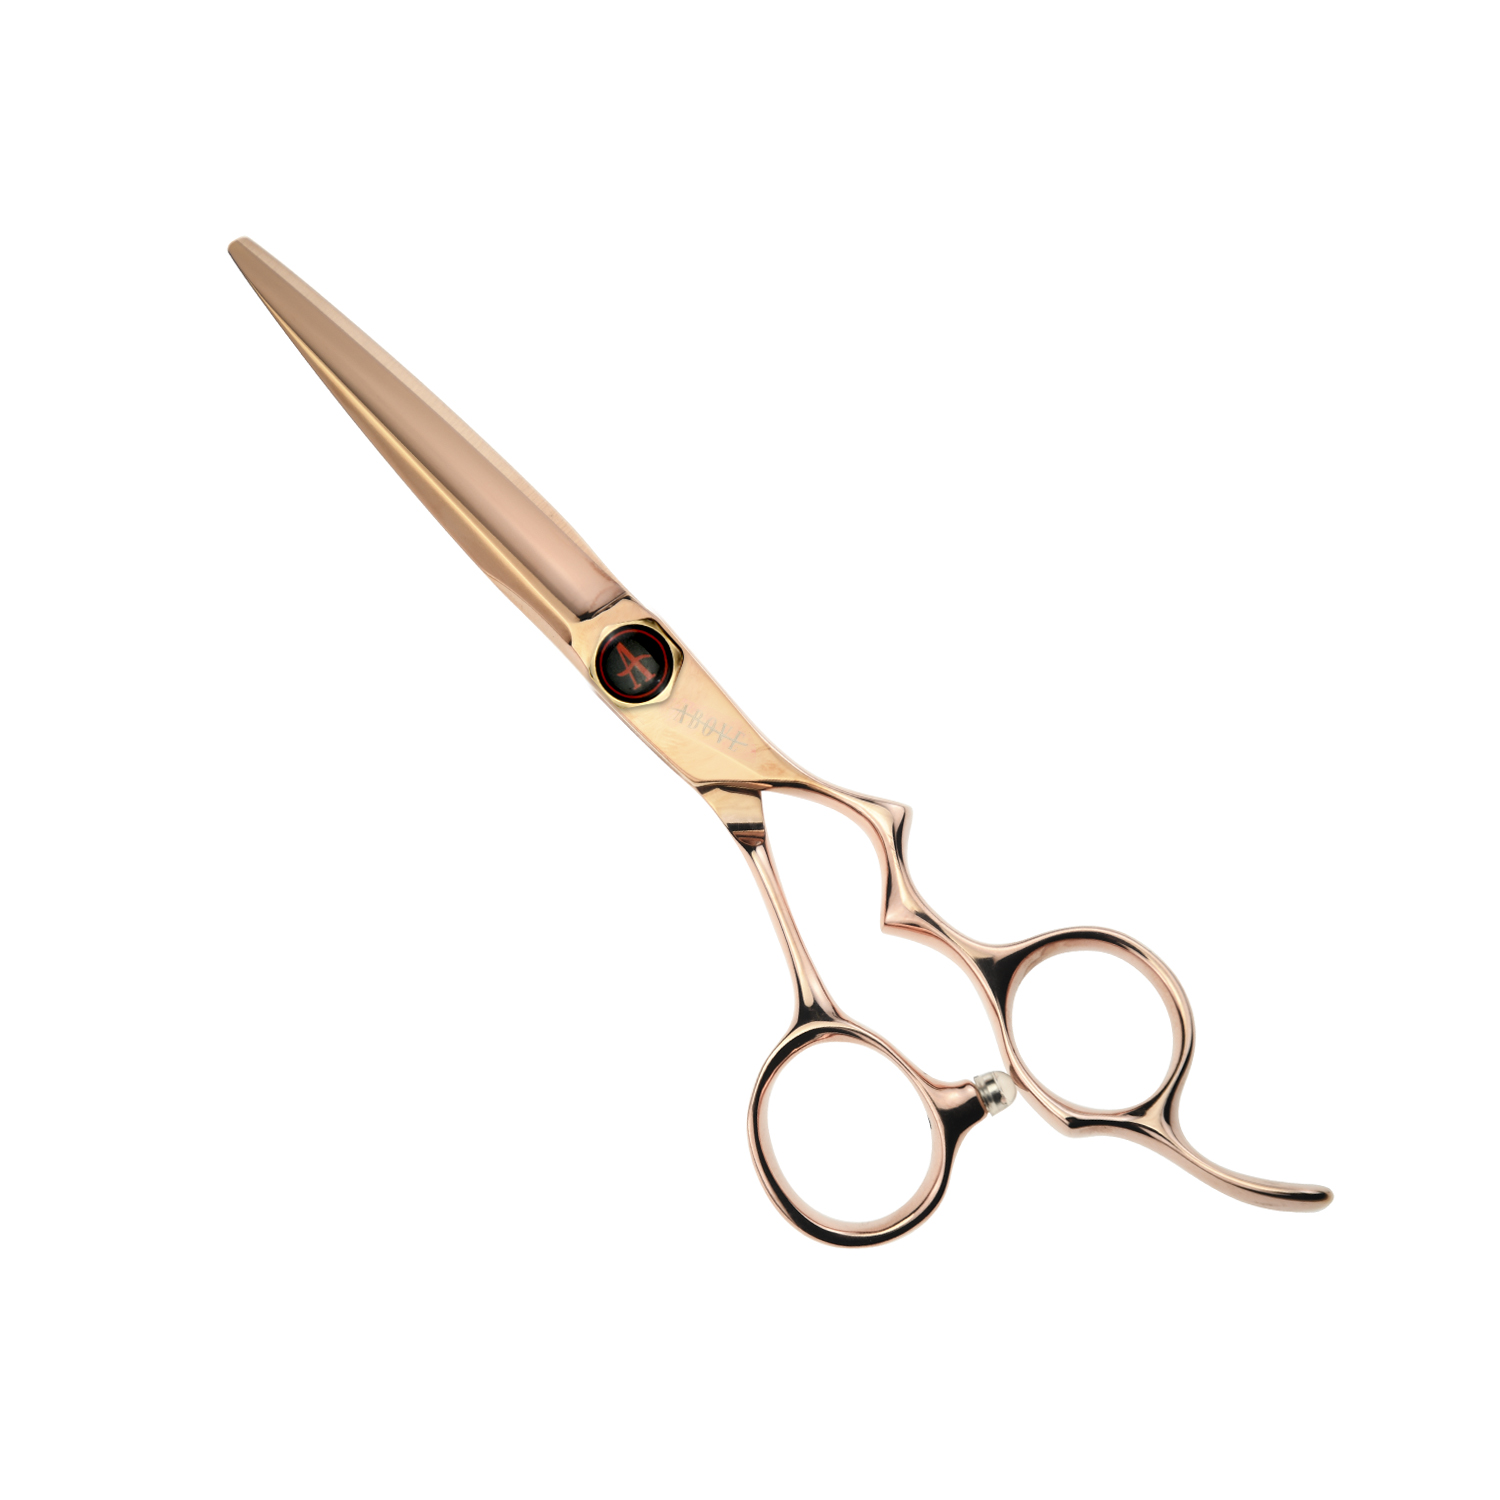 Above Shears Professional Hair Cutting Scissors Ergo Rosegold. Hair Scissors Set, Hair Scissors Kit. 5.5 inch